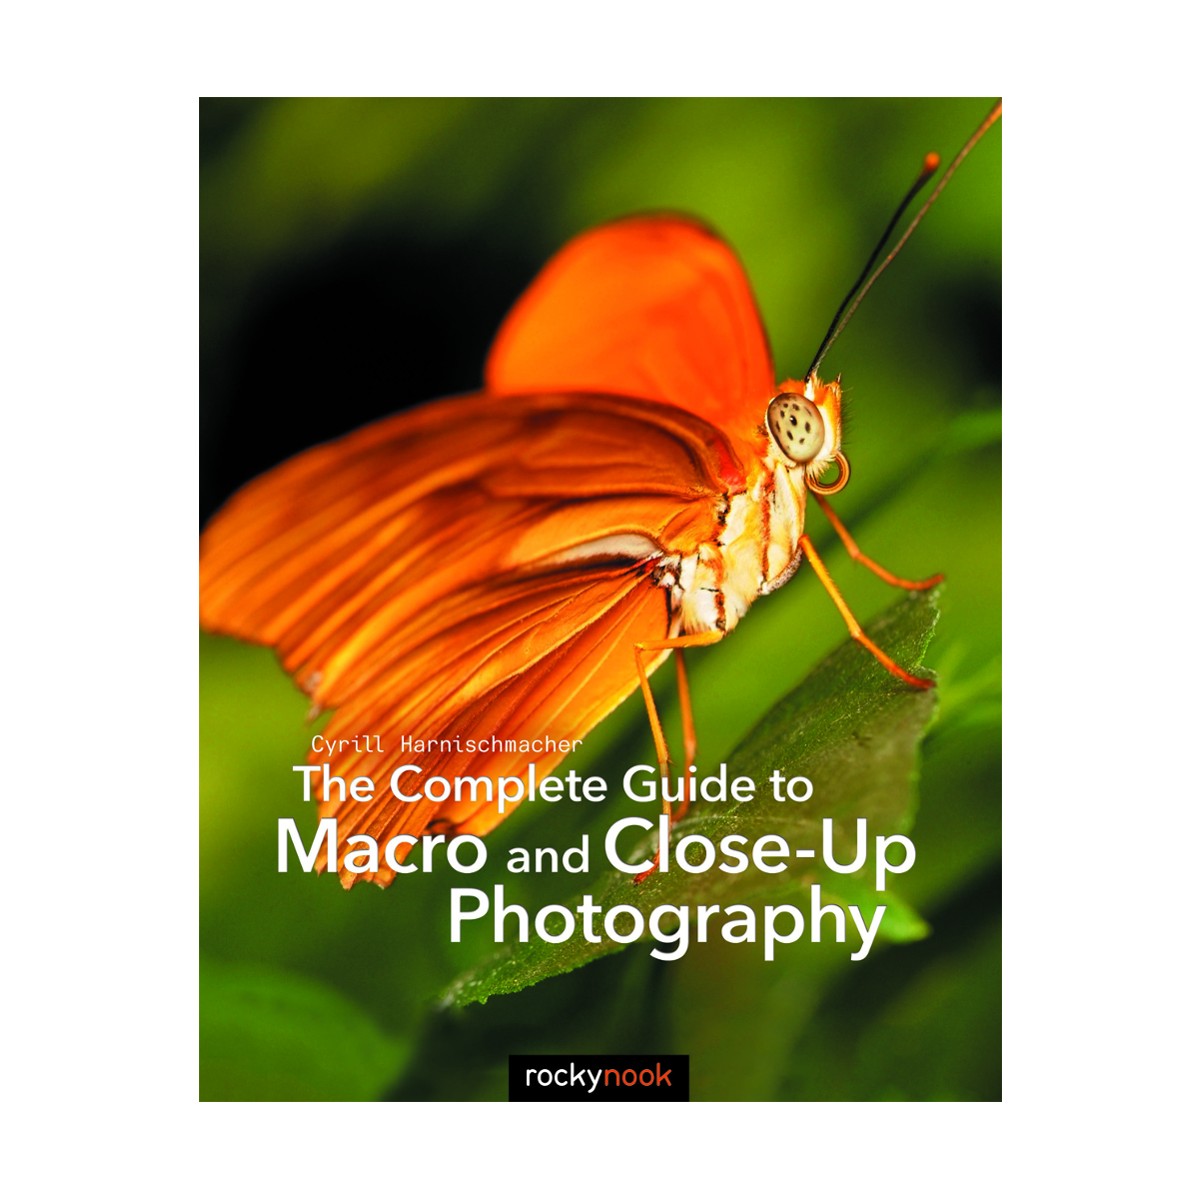 The Complete Guide to Macro and Close-Up Photography Book